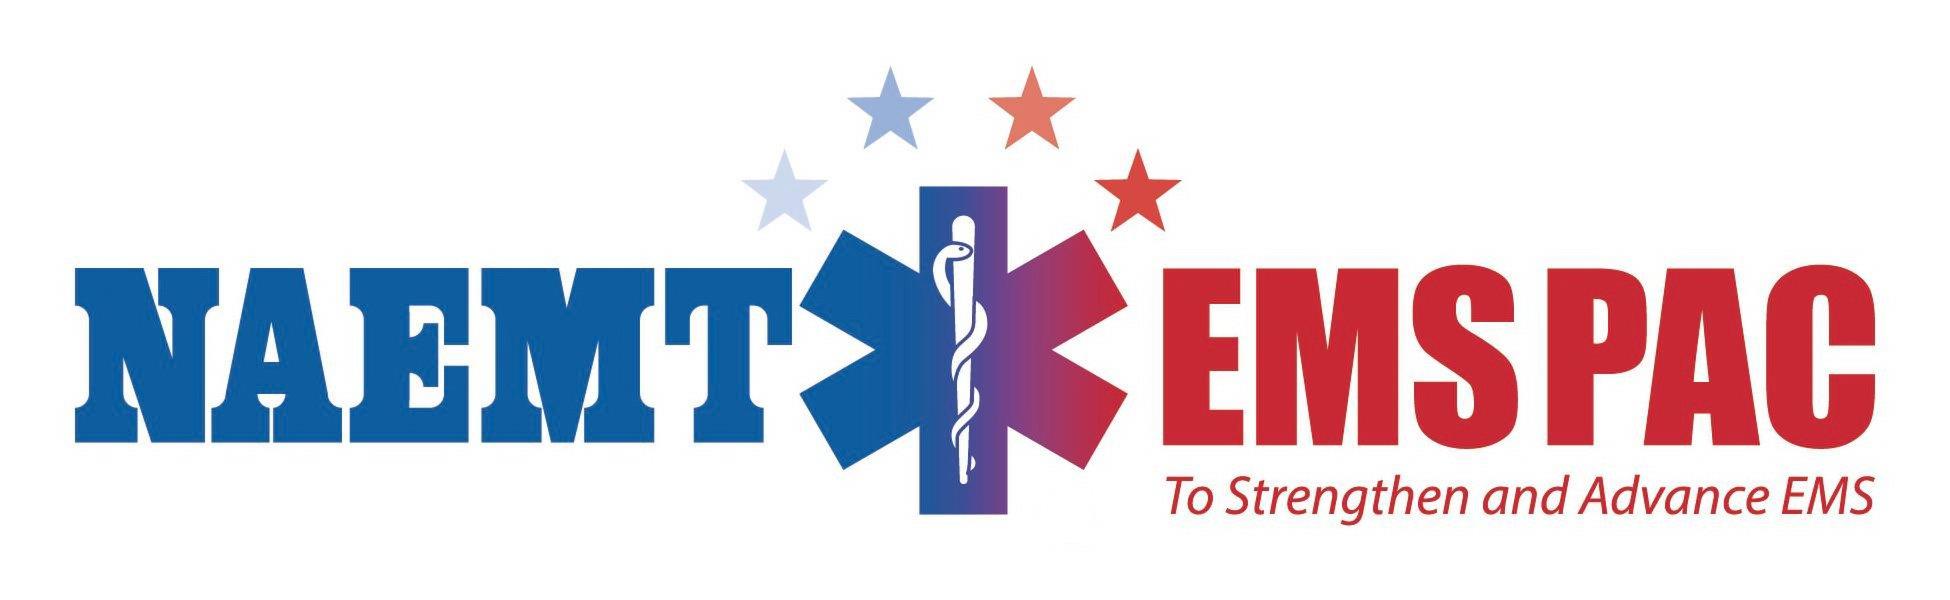  NAEMT EMSPAC TO STRENGTHEN AND ADVANCE EMS